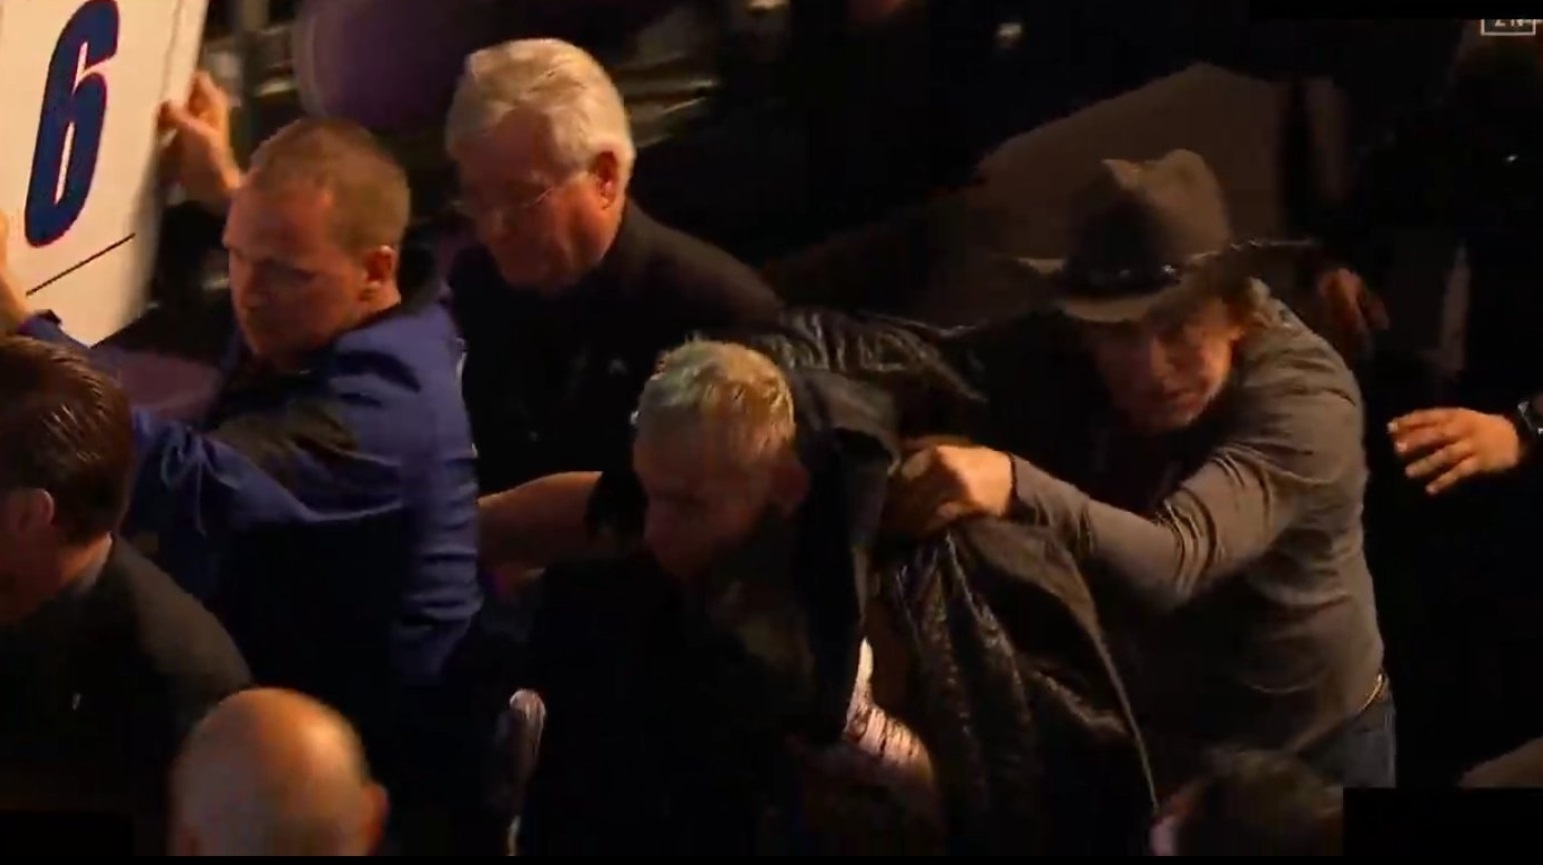 PHOTO Mickey Rourke Trying To Shield Julio Cesar Chavez Jr From Objects Being Thrown At Him